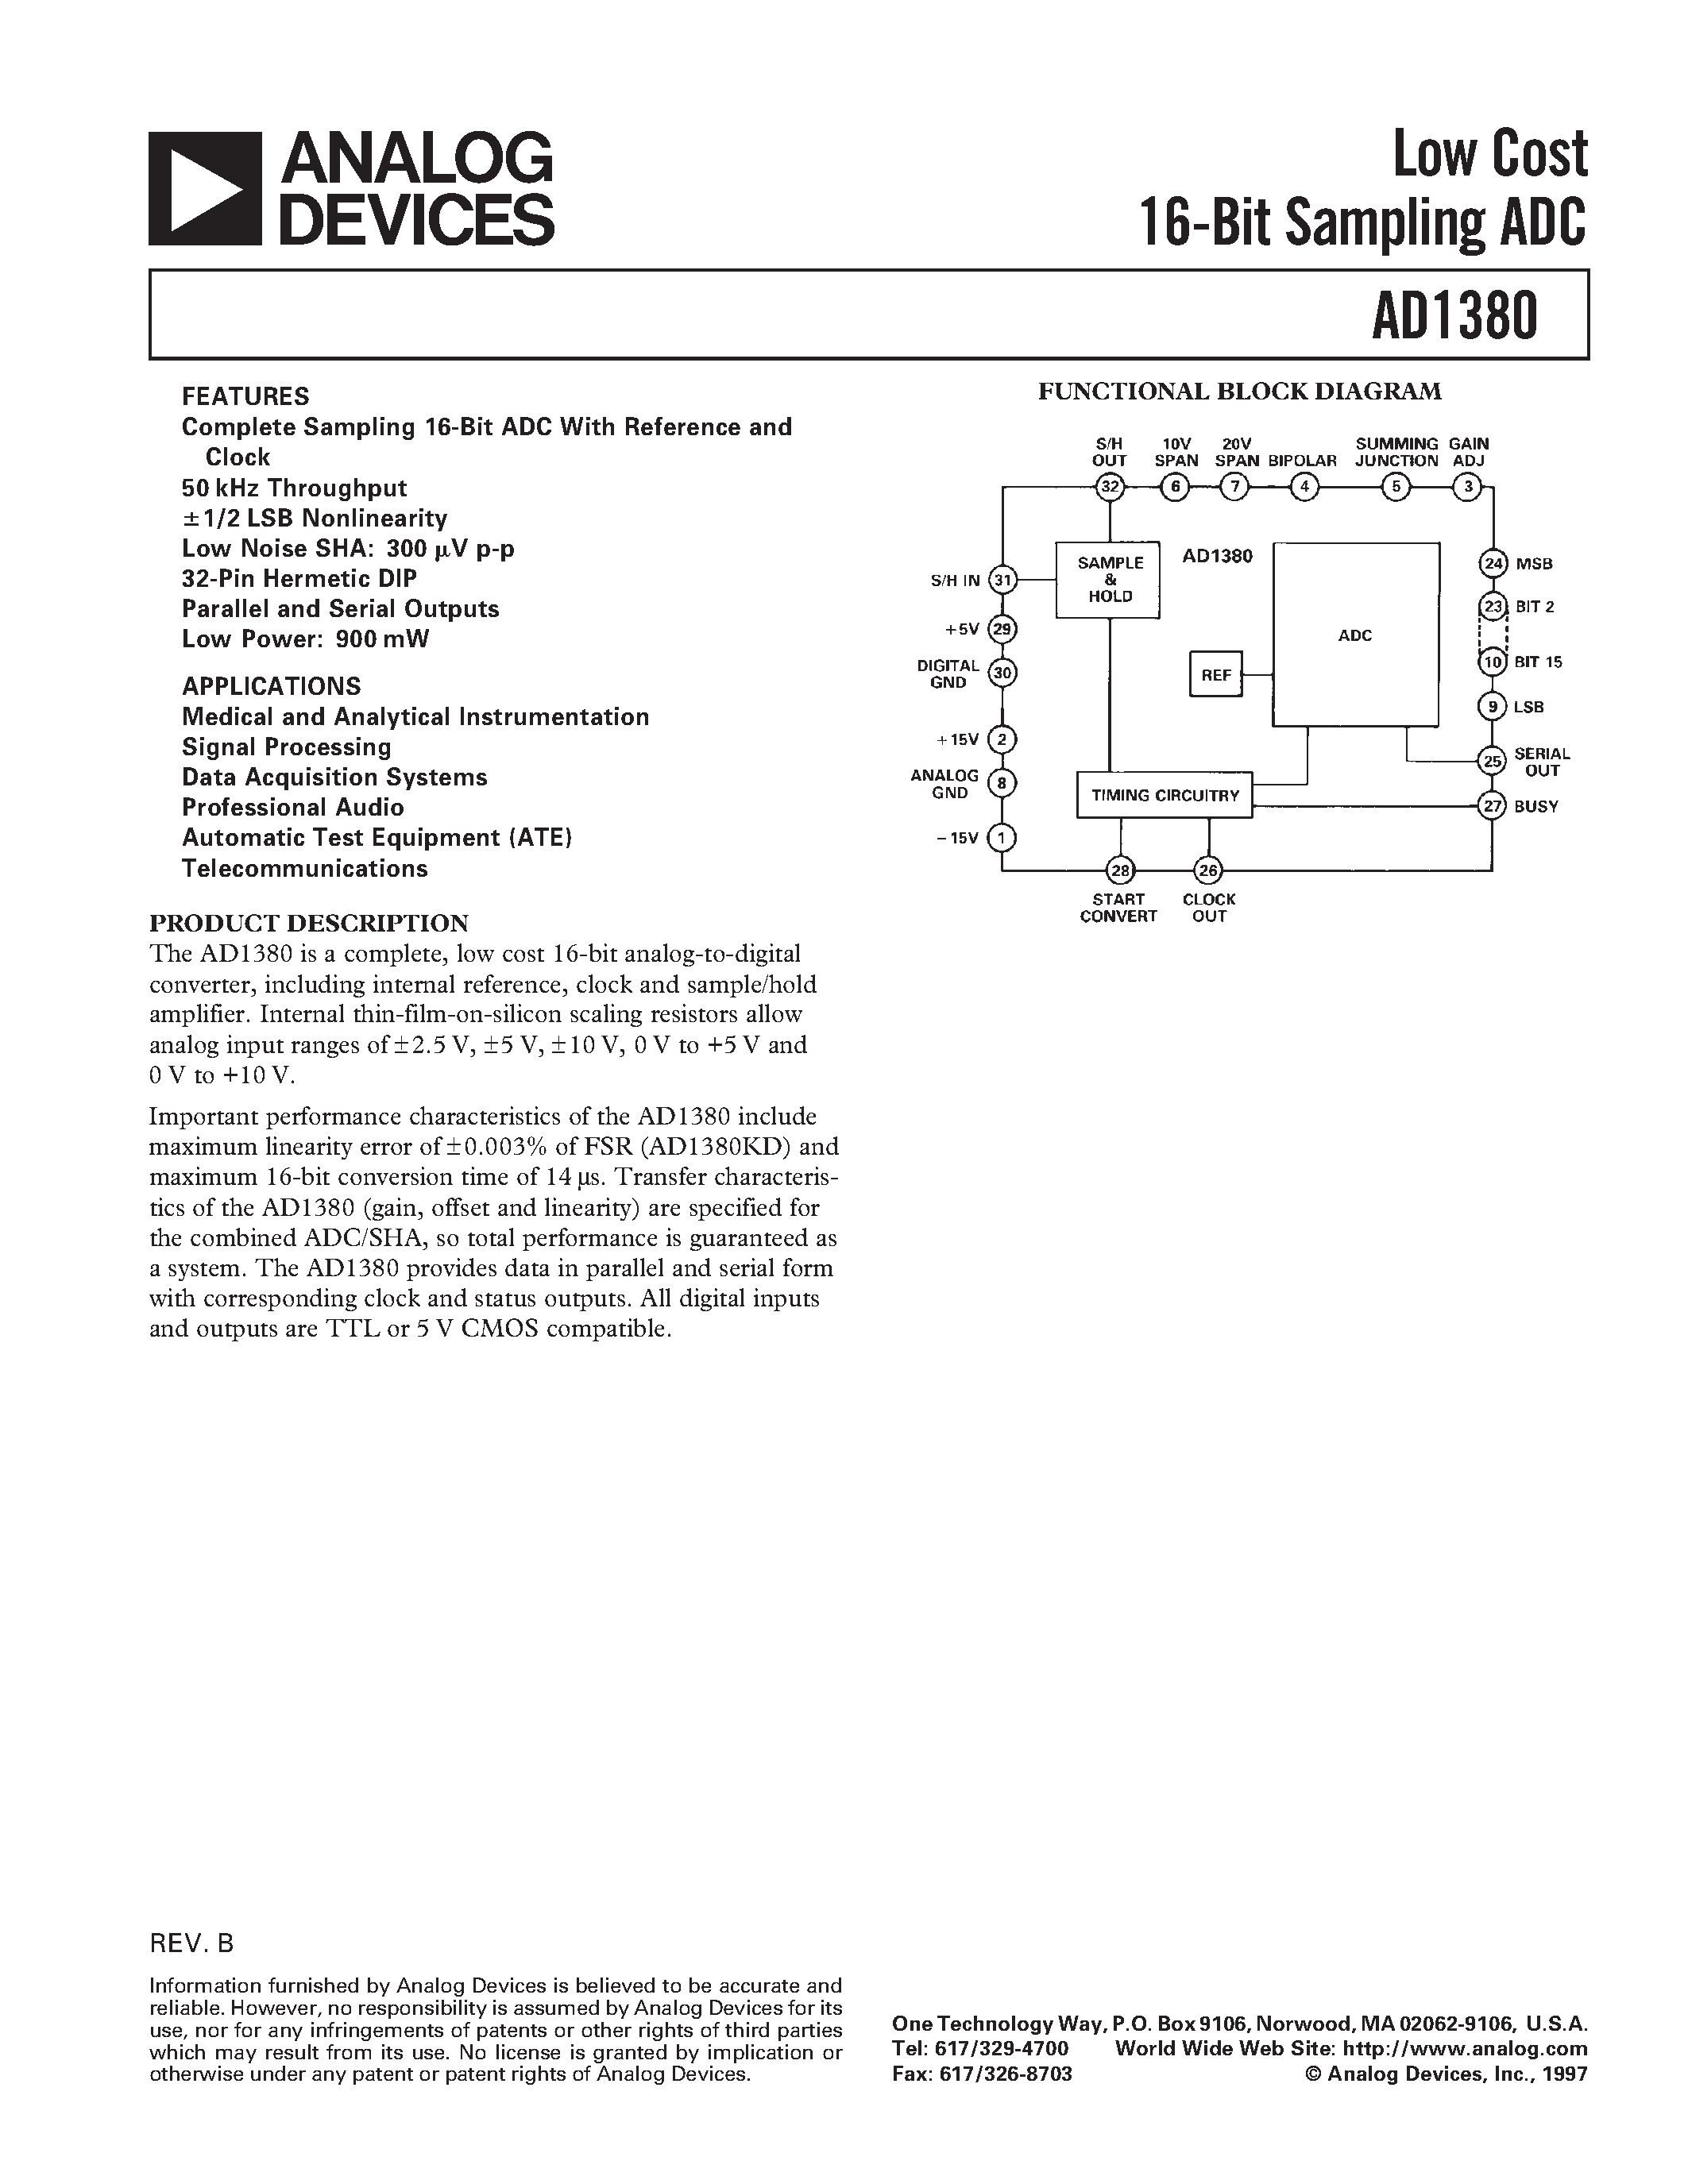 Datasheet AD1380 - Low Cost 16-Bit Sampling ADC page 1